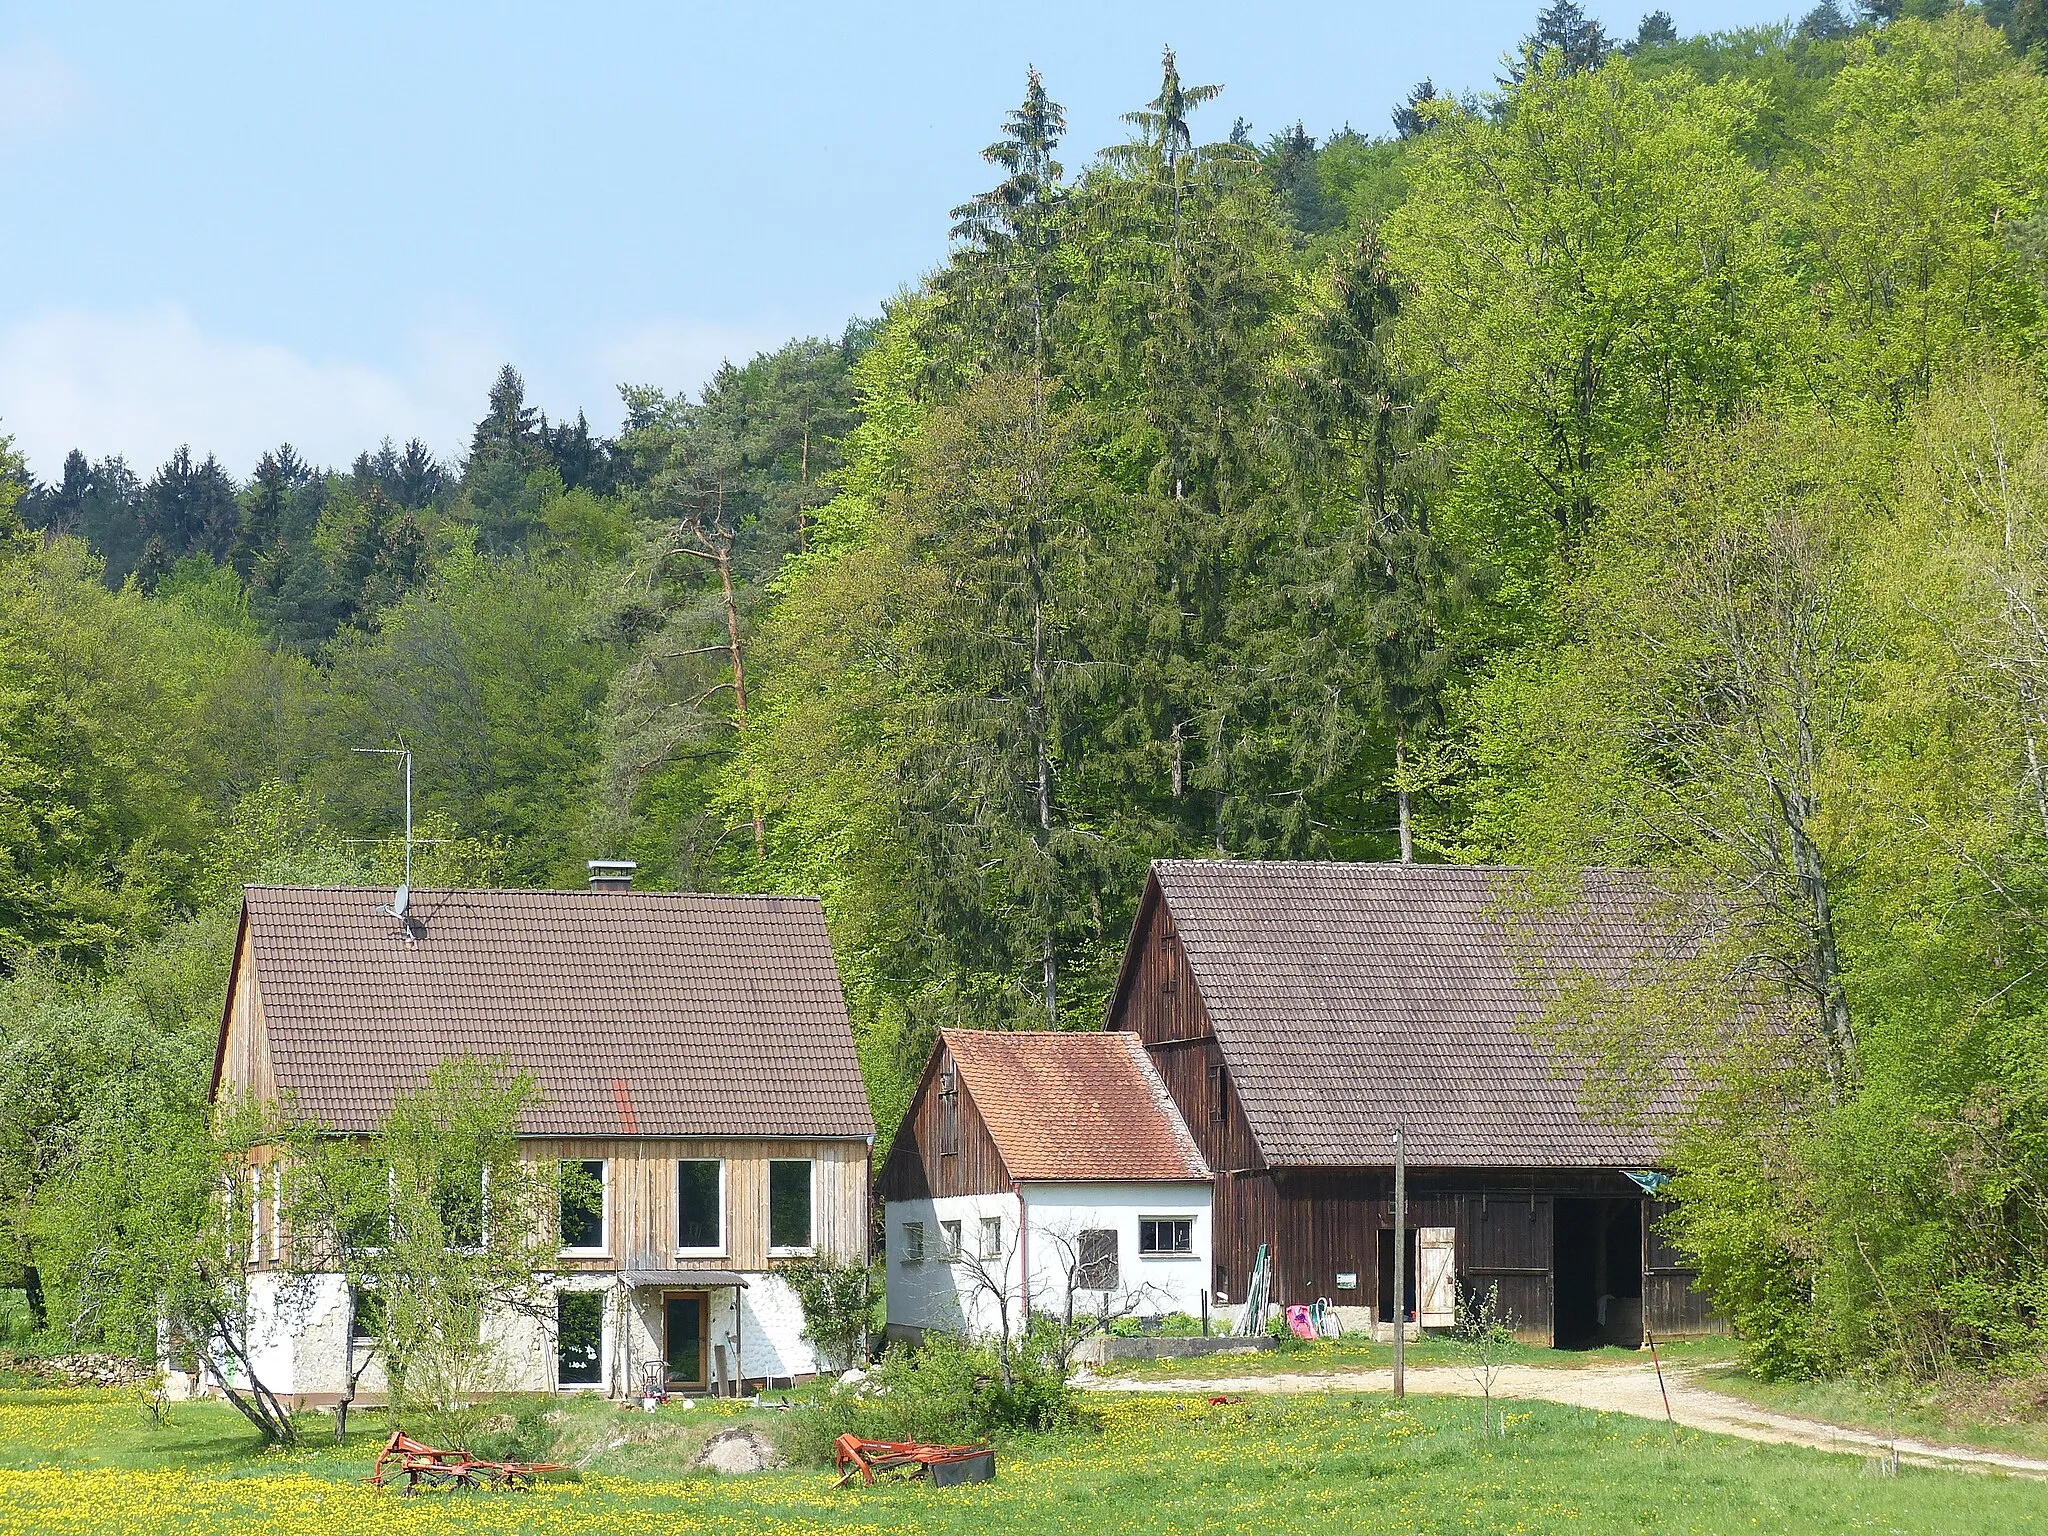 Photo showing: The solitude Eibenthal, a district of the town of Betzenstein